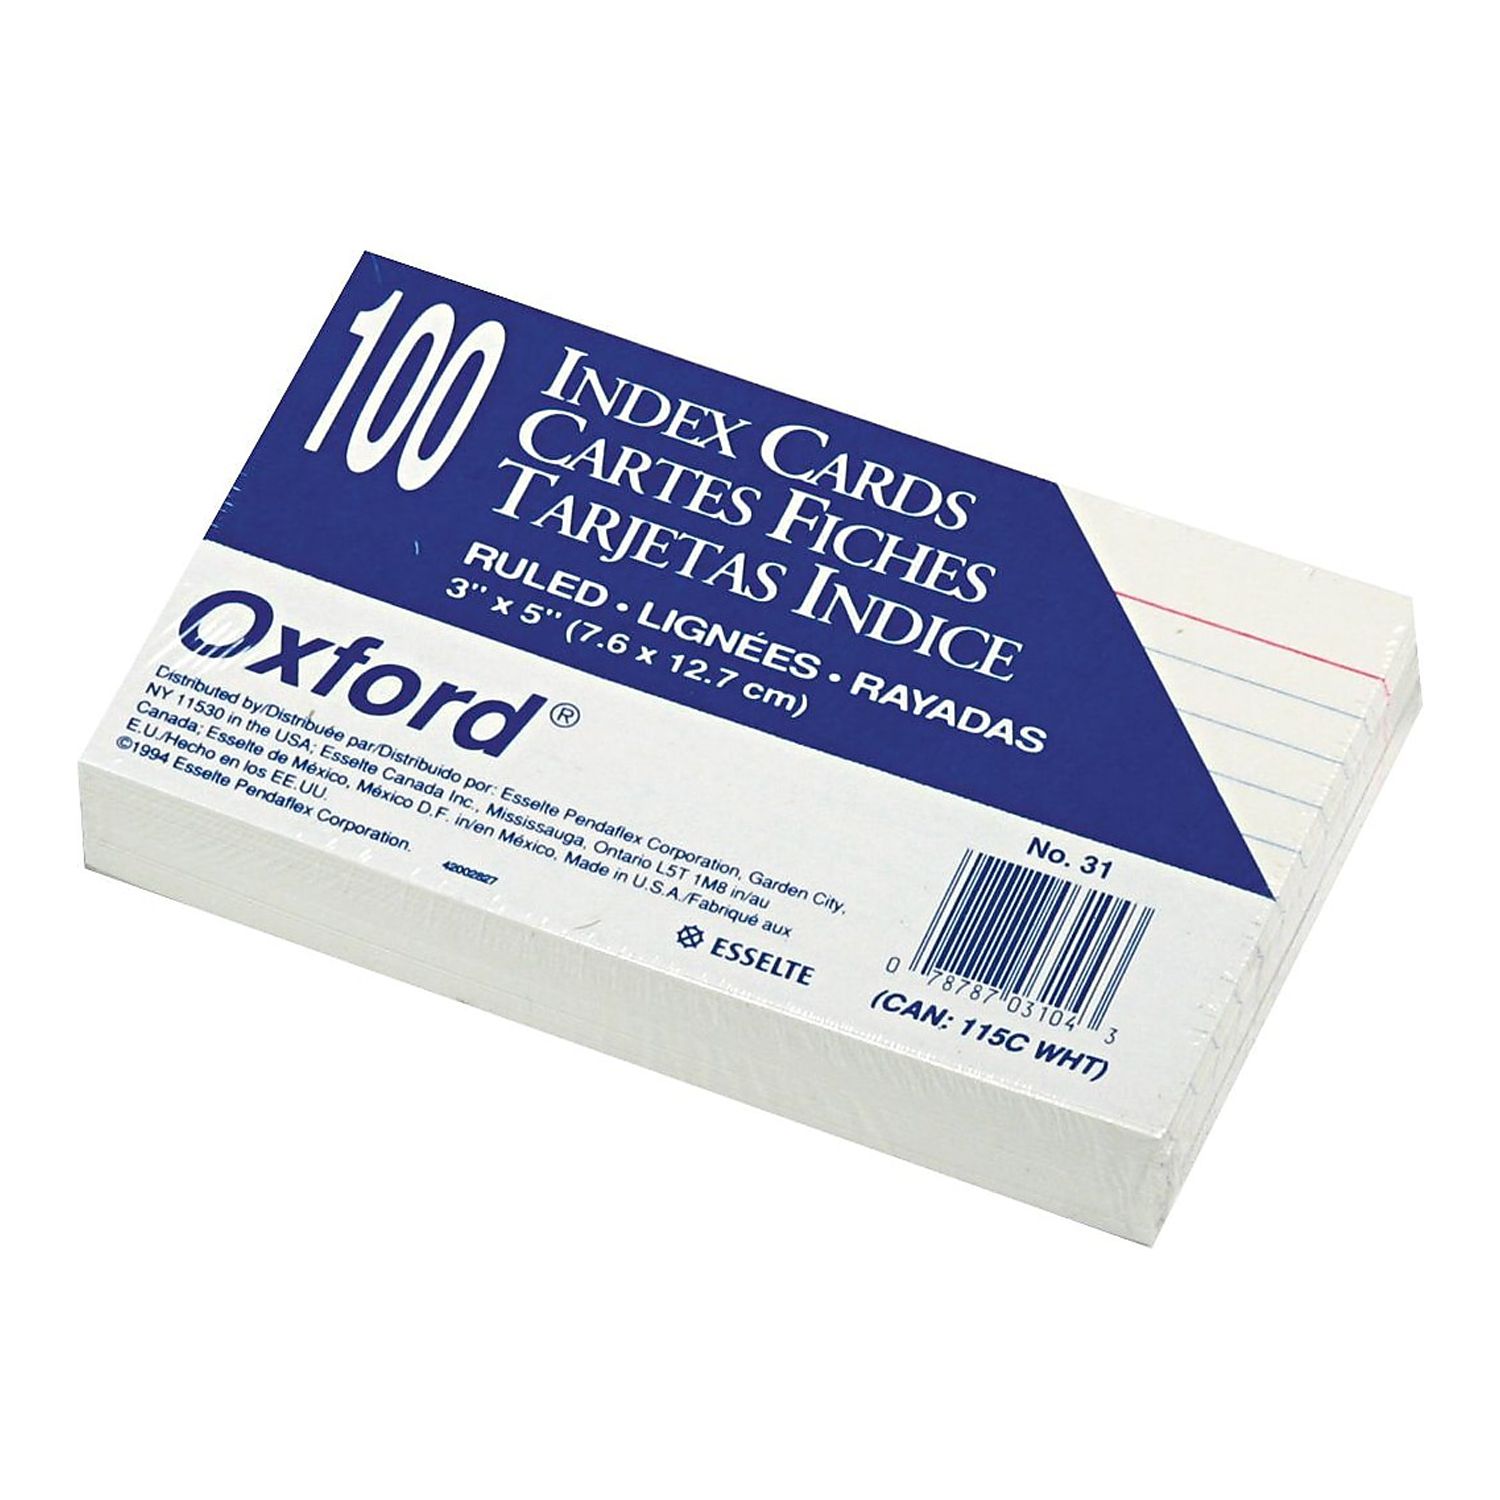 Oxford Ruled Index Cards, 3 x 5, White, 100/Pack (31) - image 3 of 4